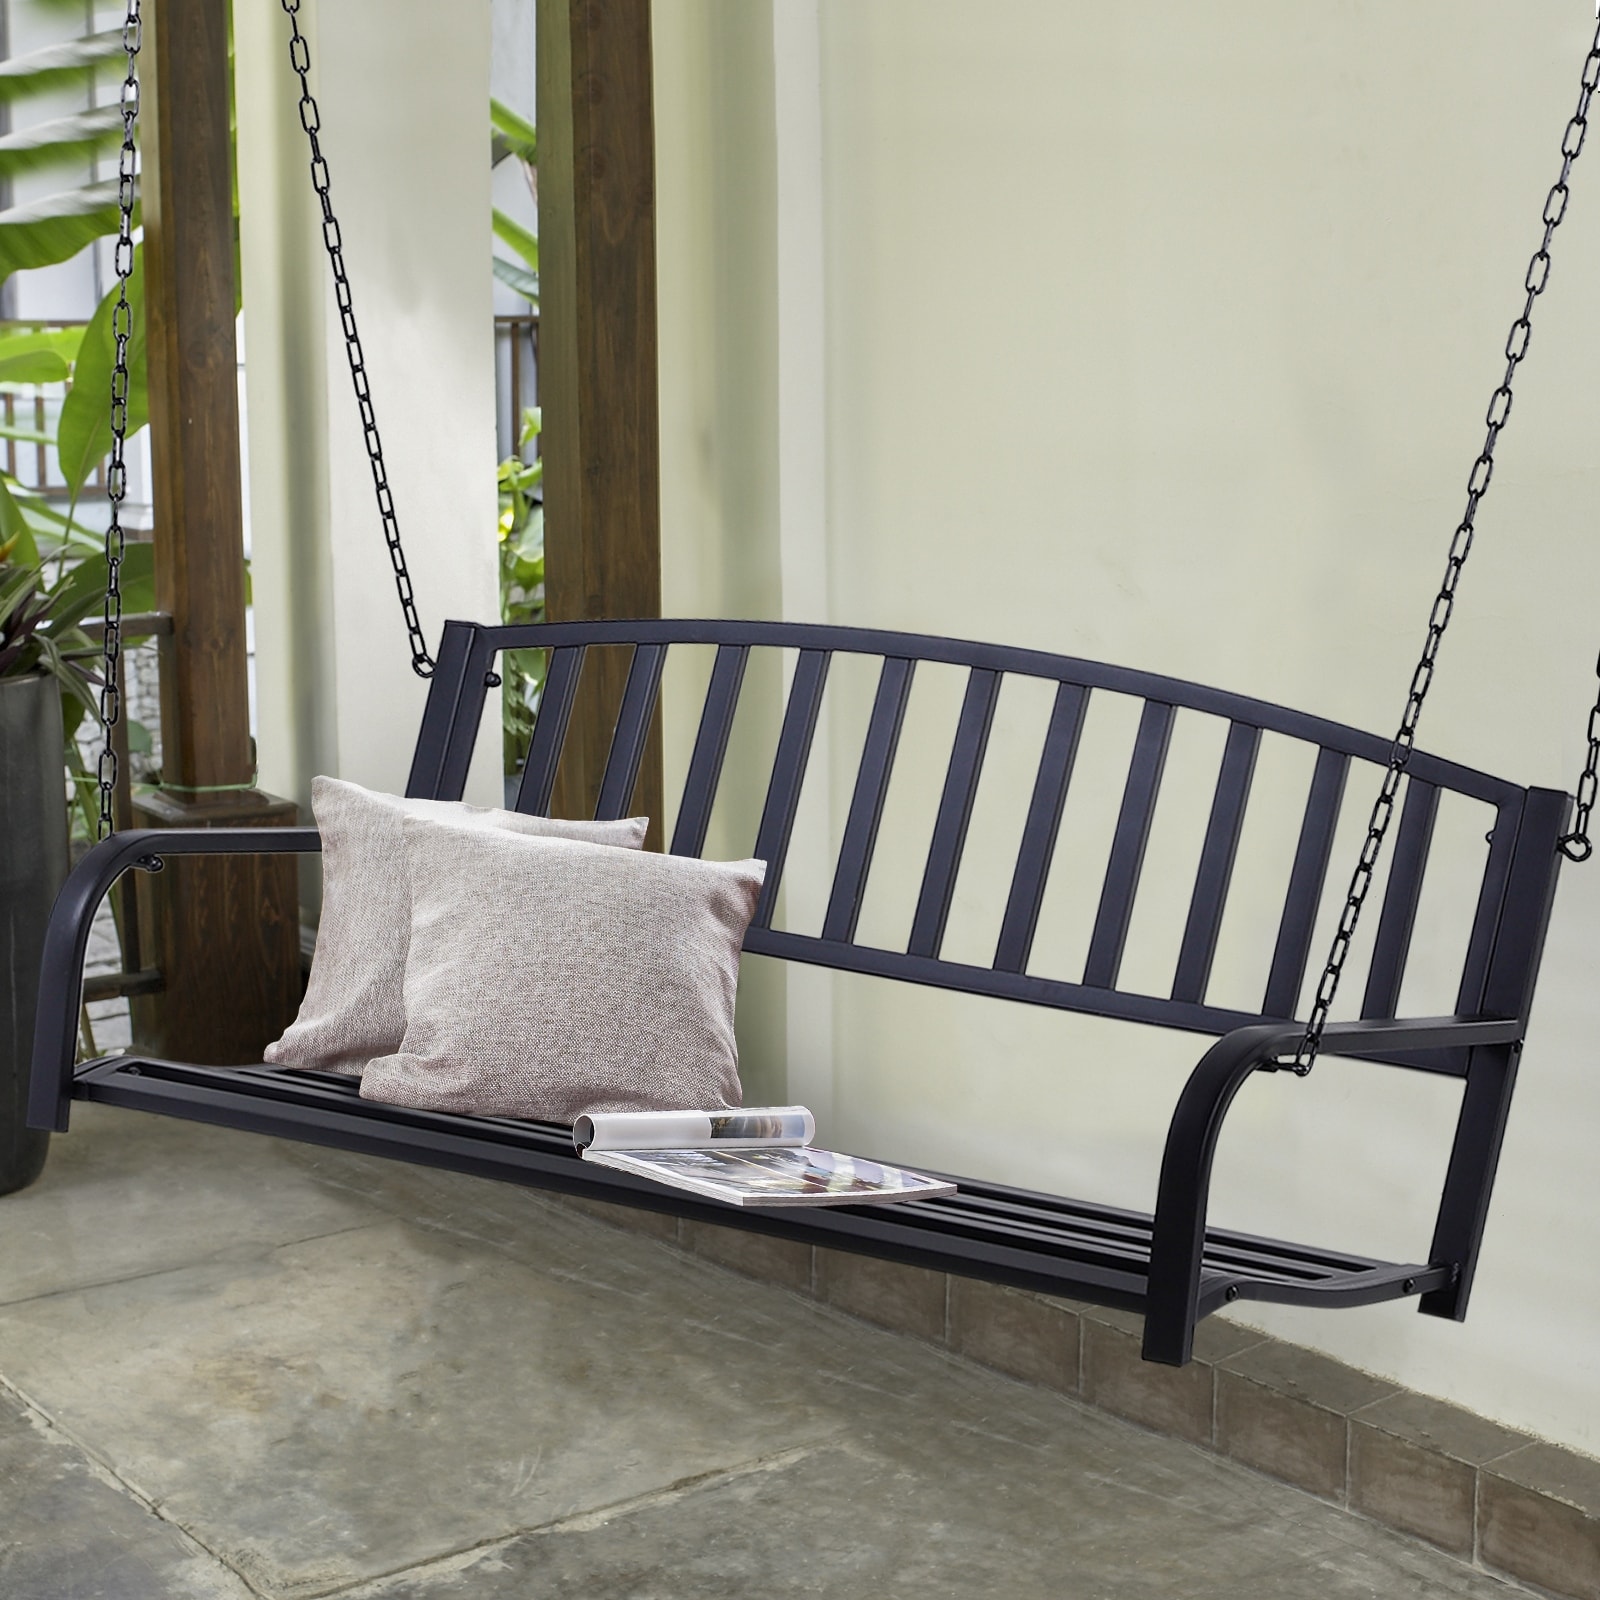 Outsunny  2 Person Front Hanging Porch Swing Bench, Ourdoor Steel Weather Resistant Swing with Chains, 50L